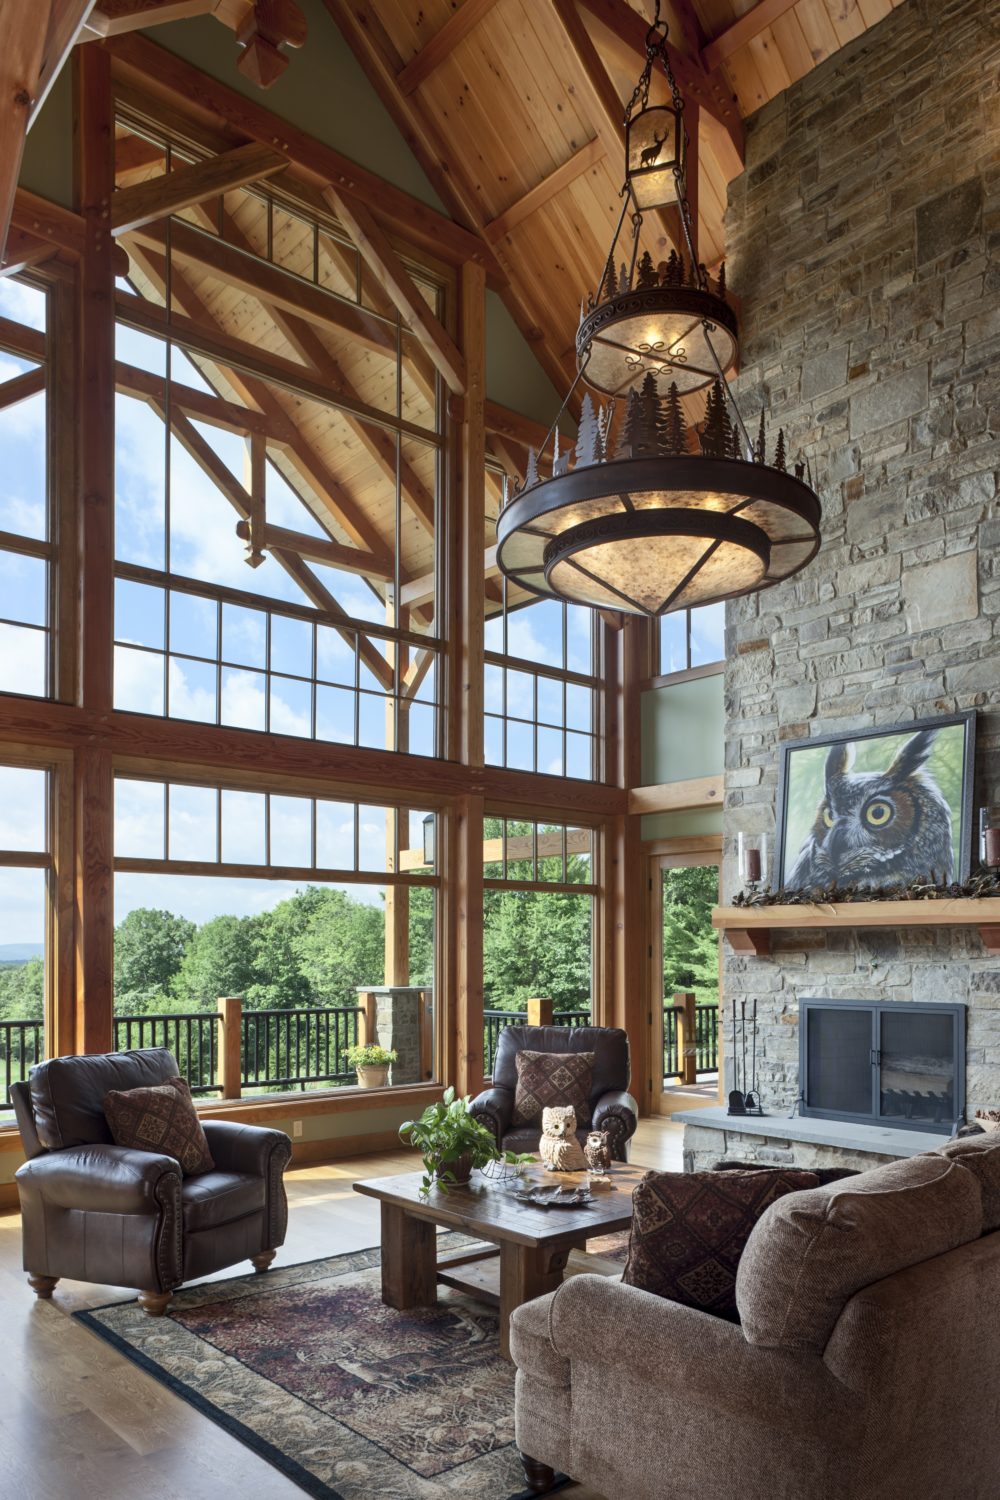 Designing a timber frame living space